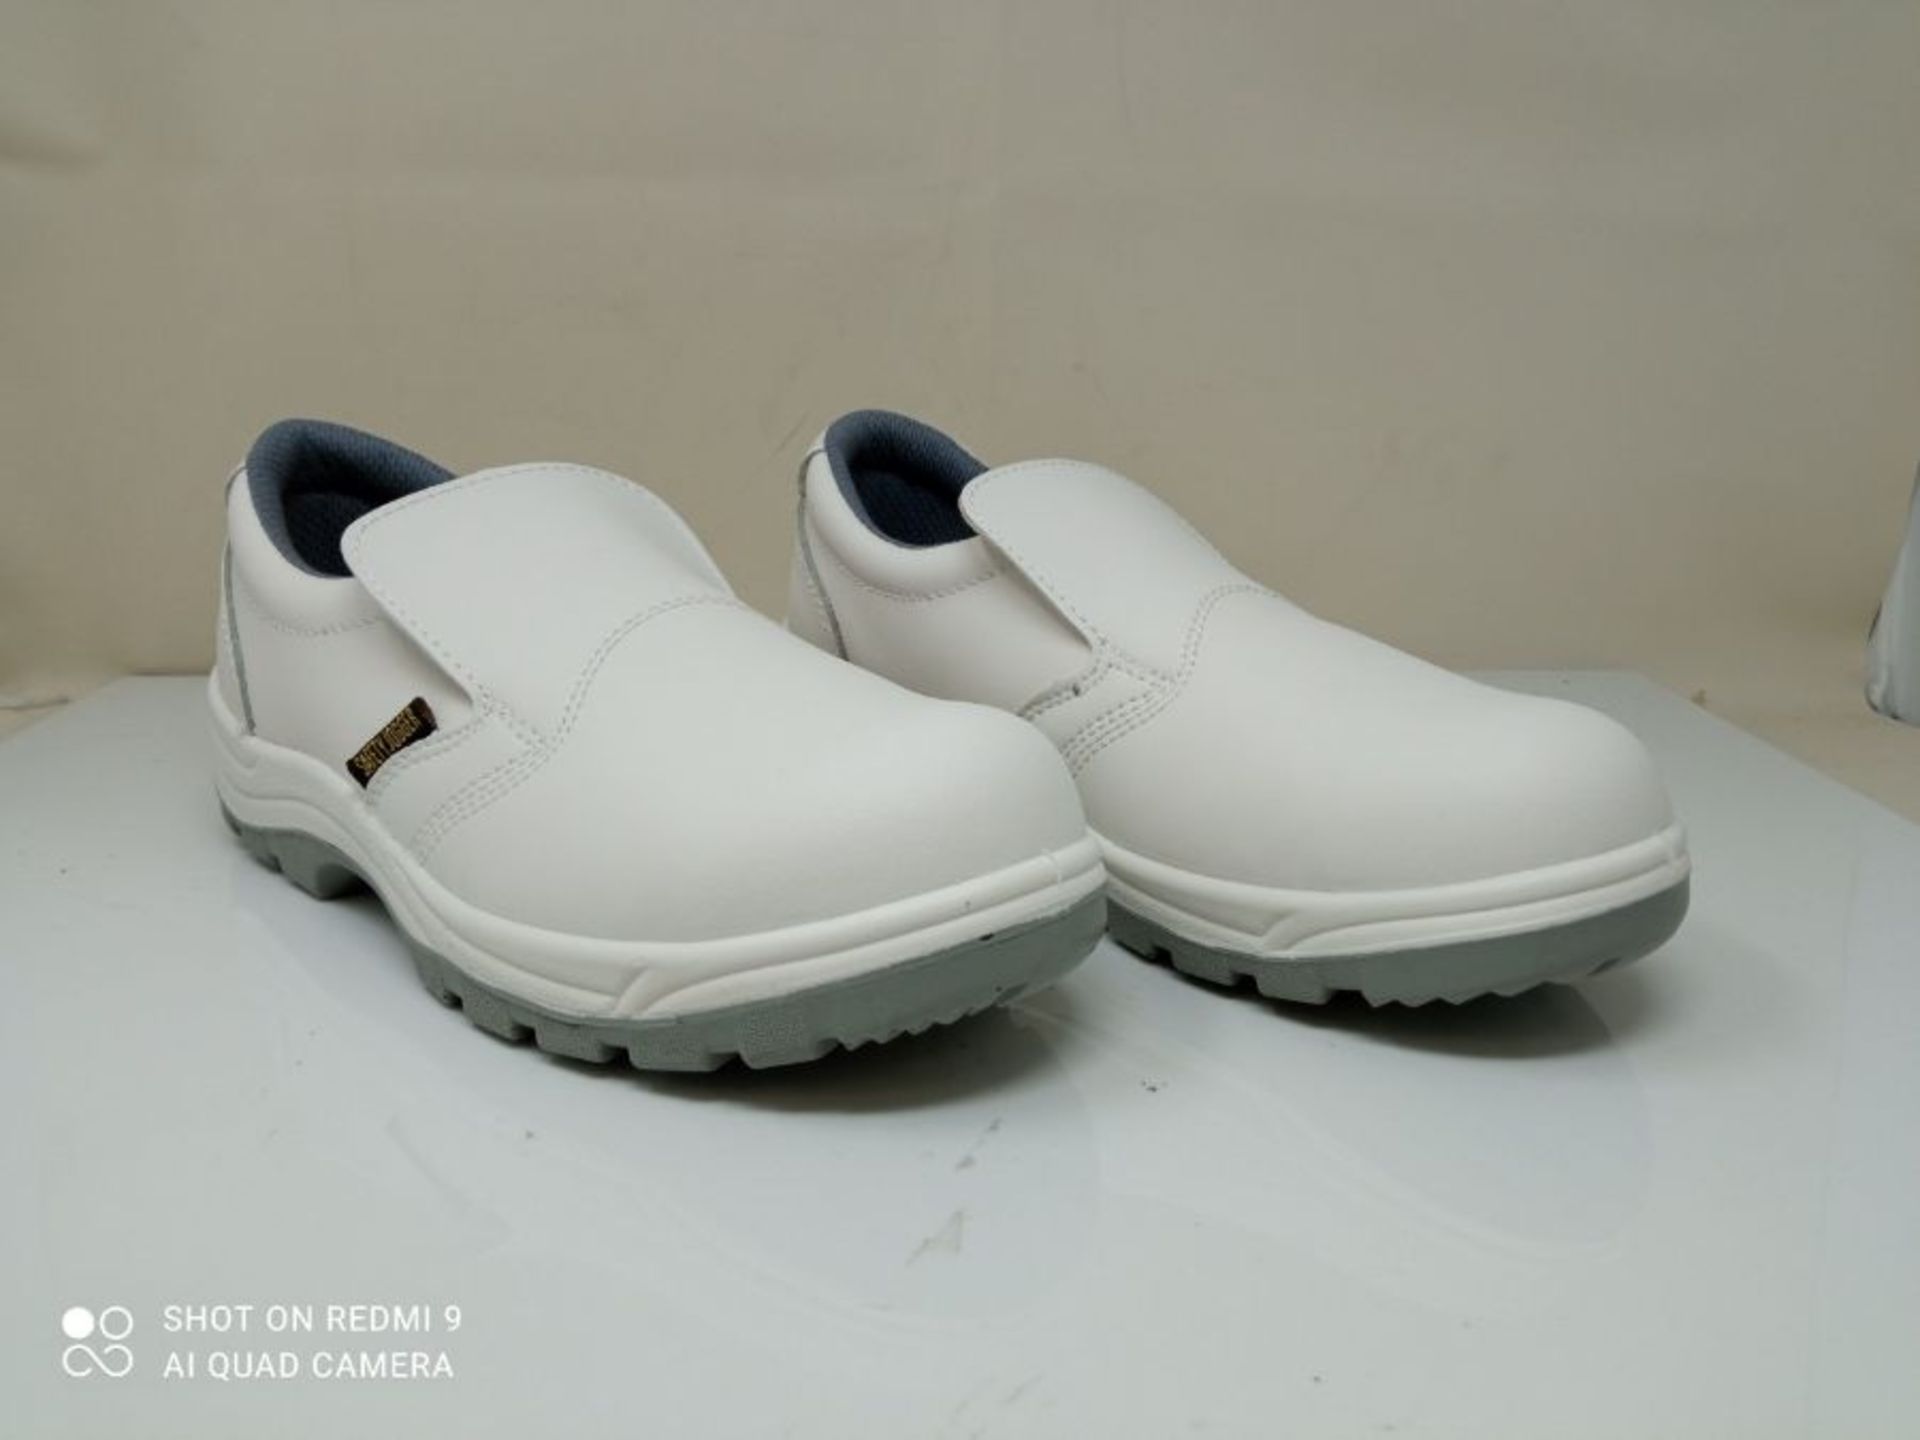 Steel Toe Cap Safety Clog - Safety Jogger Industrial X0500 White, 7.5 UK - Image 3 of 3